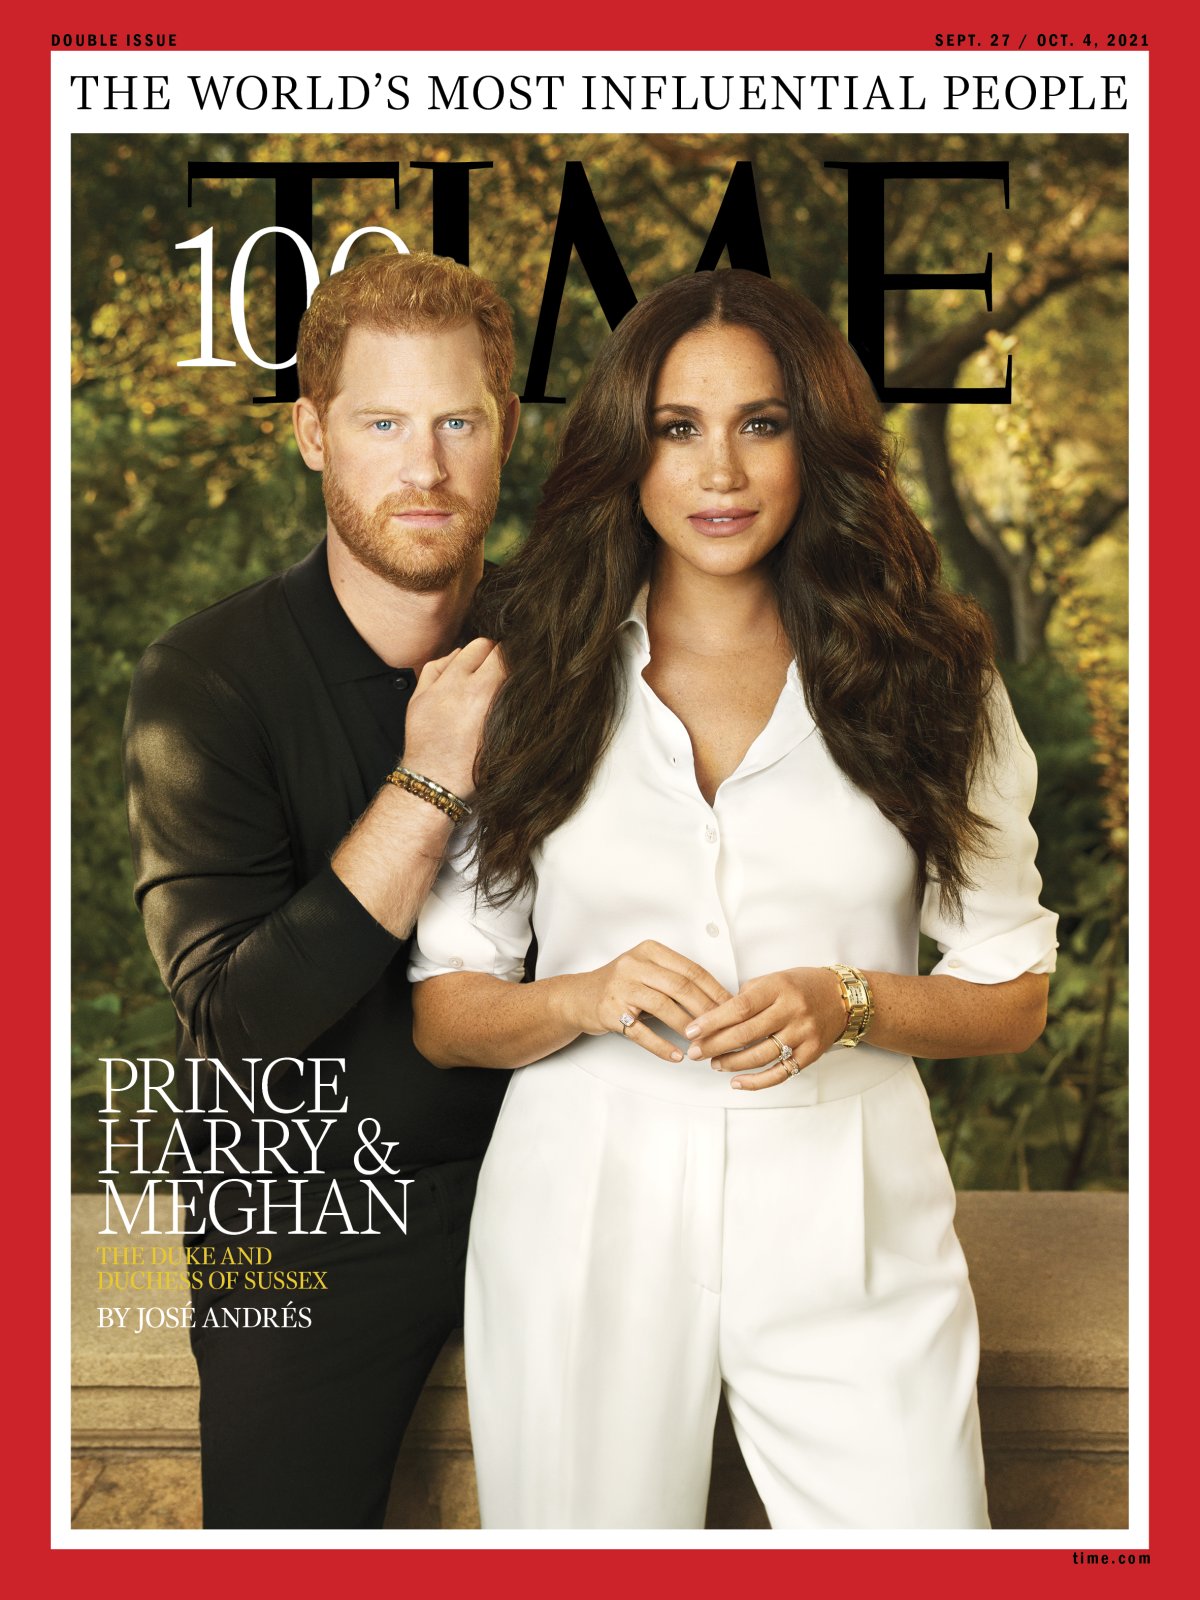 Harry and Meghan's Time100 Cover Shoot